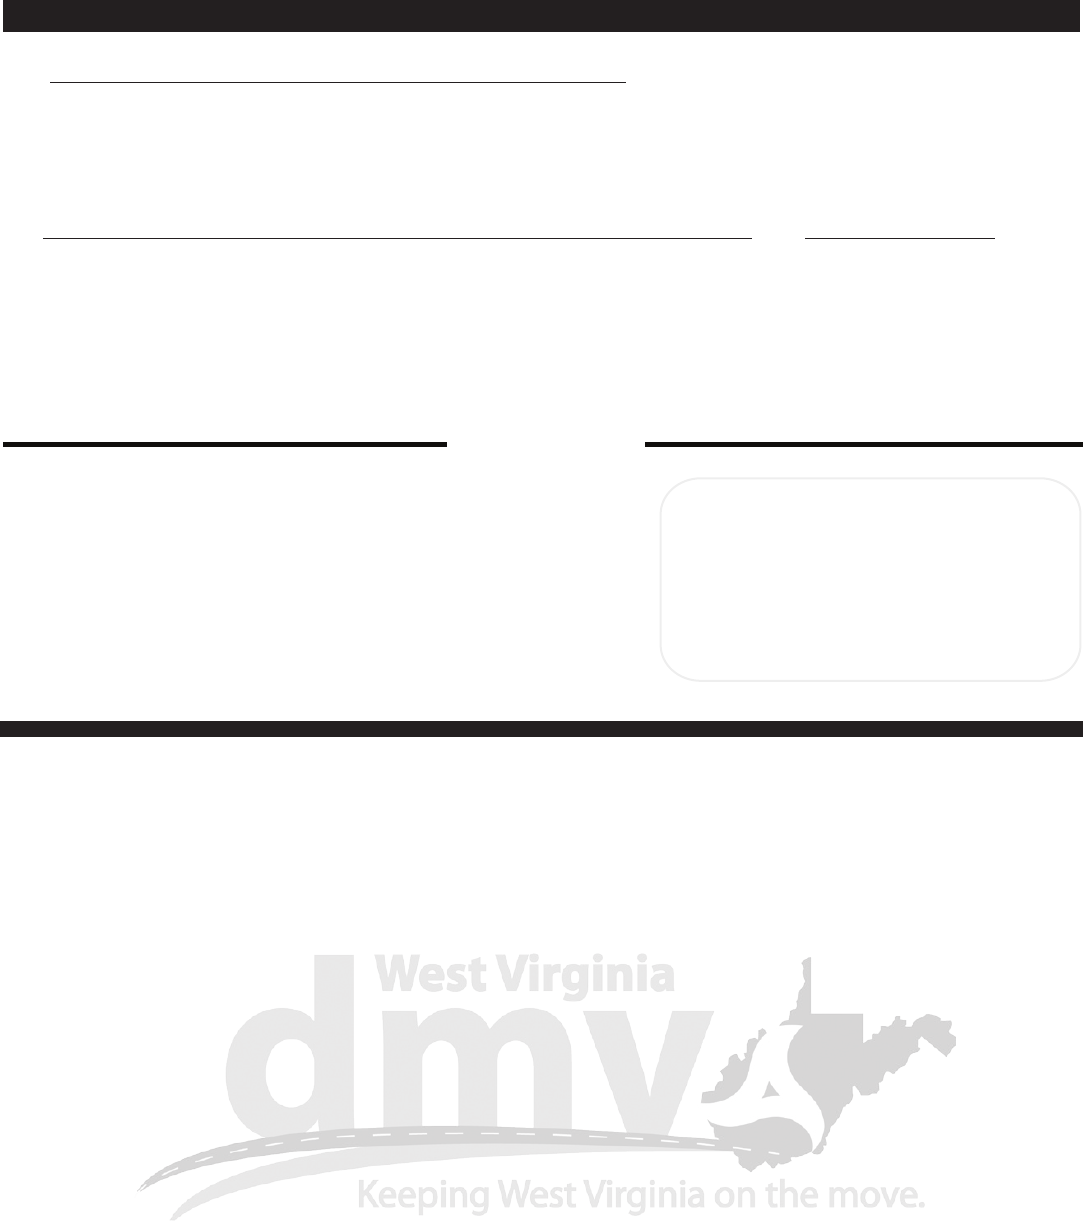 West Virginia Owner and Purchasing Affidavit Form